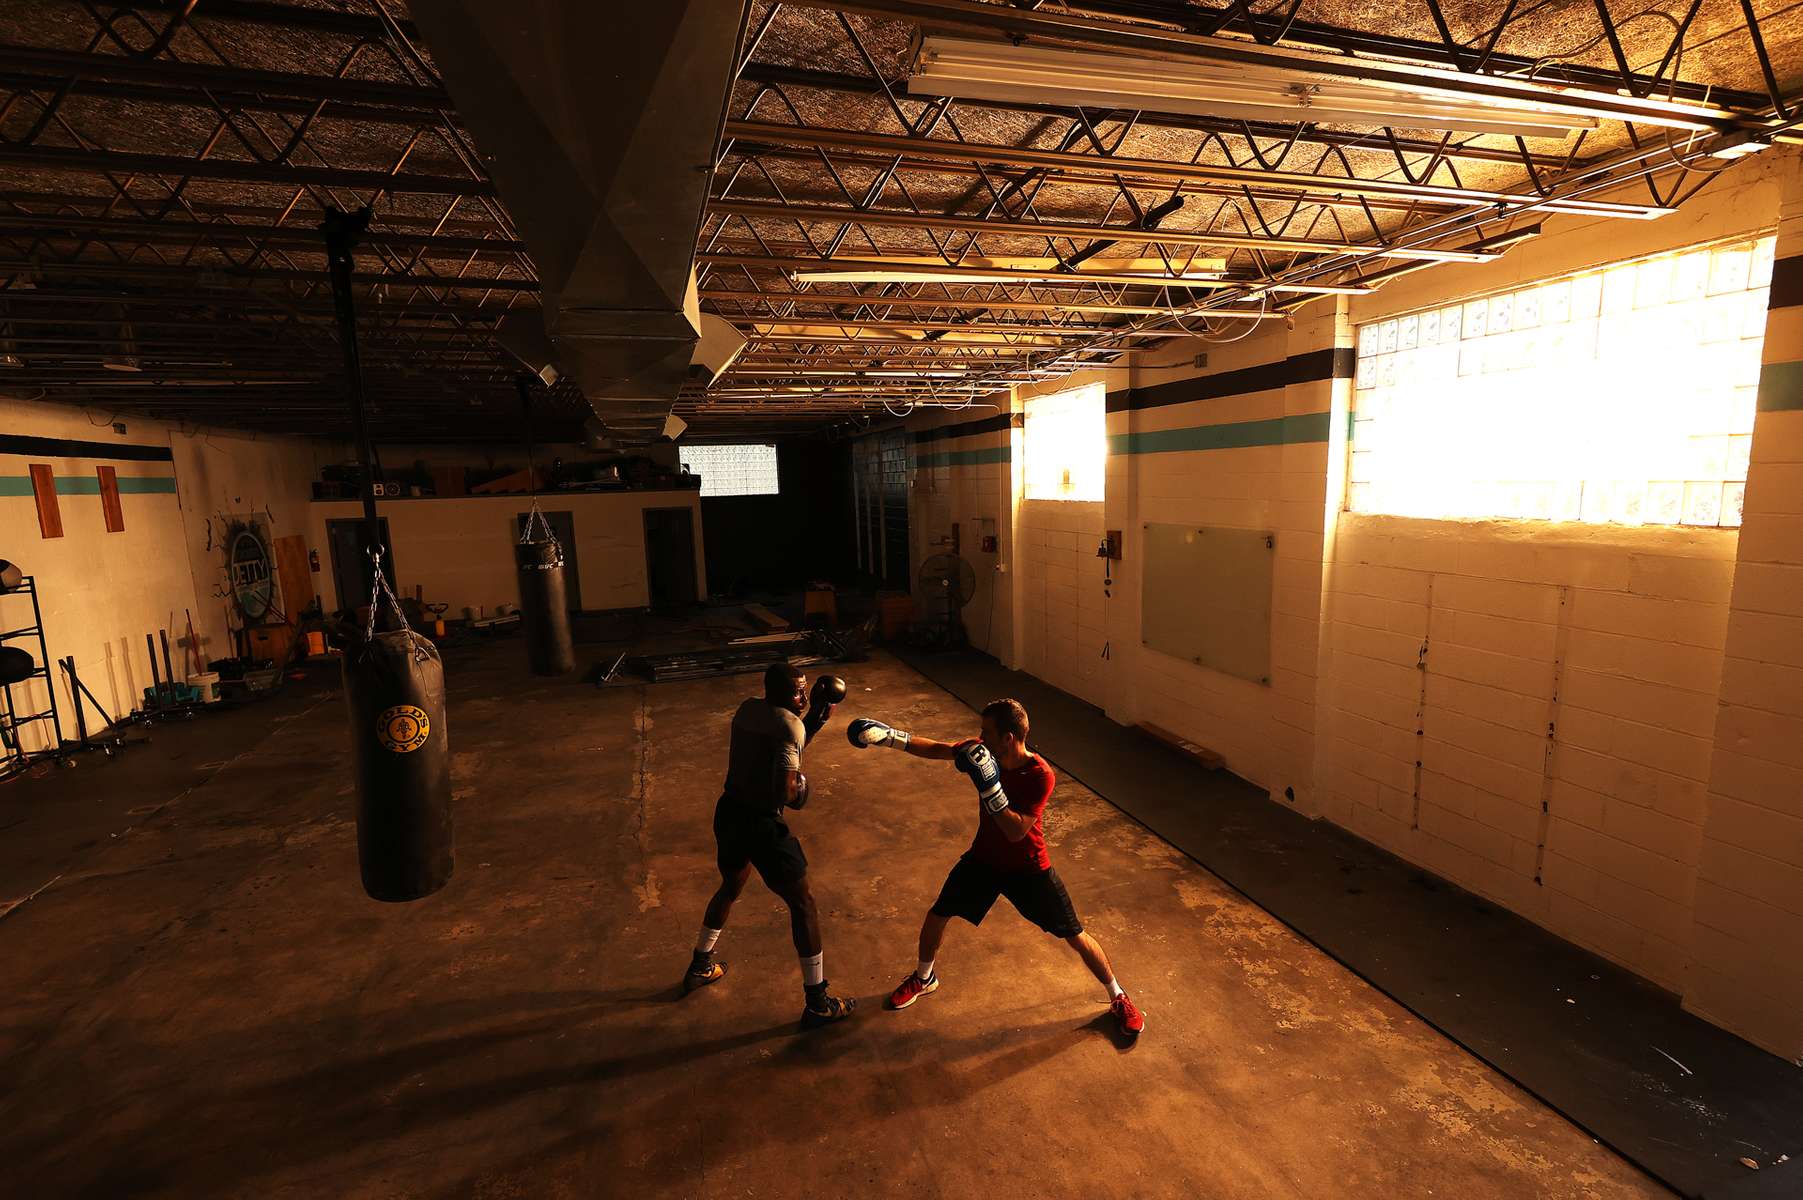 Recreational boxer Raheem Yusuff (left) spars with three time New York Golden Gloves boxer Anthony Lopez  during training session in a warehouse that was once Jetty gym on July 30, 2020 in Oceanside, New York. Dennis Guerrero, who is a co owner of Jetty has tried to hold many types of outdoor and open air workouts while the gym remains closed due to the coronavirus pandemic.  Since all gyms in New York had been closed since March 13, they have been trying to keep up financially to sustain the gym. Guerrero and his partner Michael Levitz have decided to closed their doors for good next week.  They will be moving their workouts online and at select locations.  Governor Andrew Cuomo announced that gyms will not be permitted to reopen during phase 4 until New York's Health Department determines if air filtering systems are circulating the coronavirus. More than 4,540,000 people in the United States alone have been infected with the coronavirus and at least 154,000 have died.  